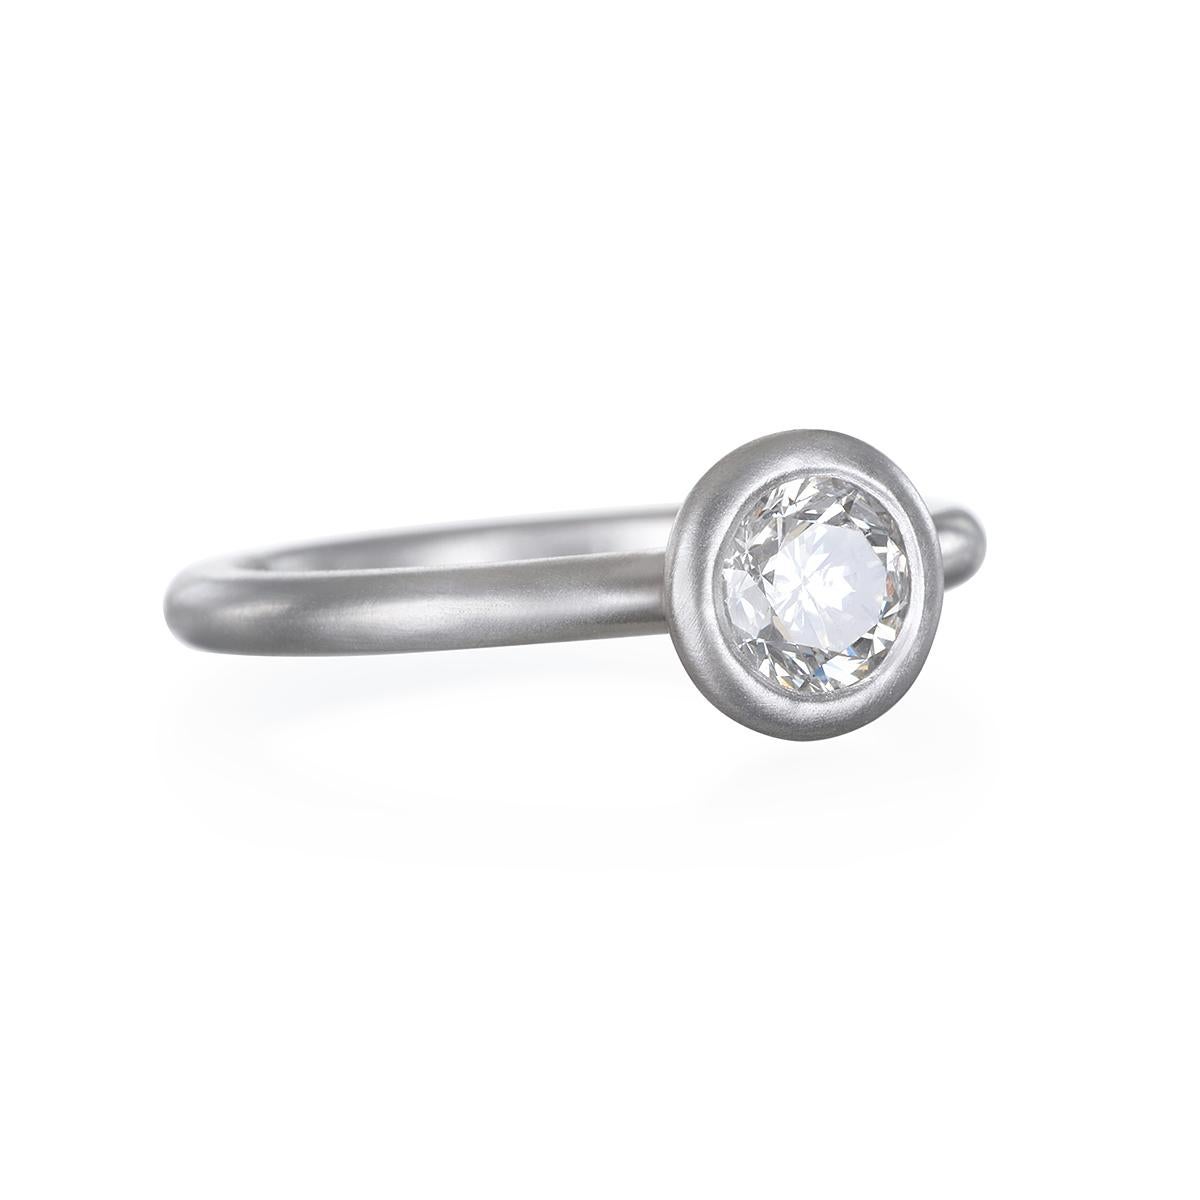 This timeless yet contemporary platinum diamond engagement ring. Bezel set with an open gallery for an airy feel, with a matte finish.
Can be stacked, mixed and matched to create your own style. 

Size 6.75  Ring can be sized.
Diamond: Round